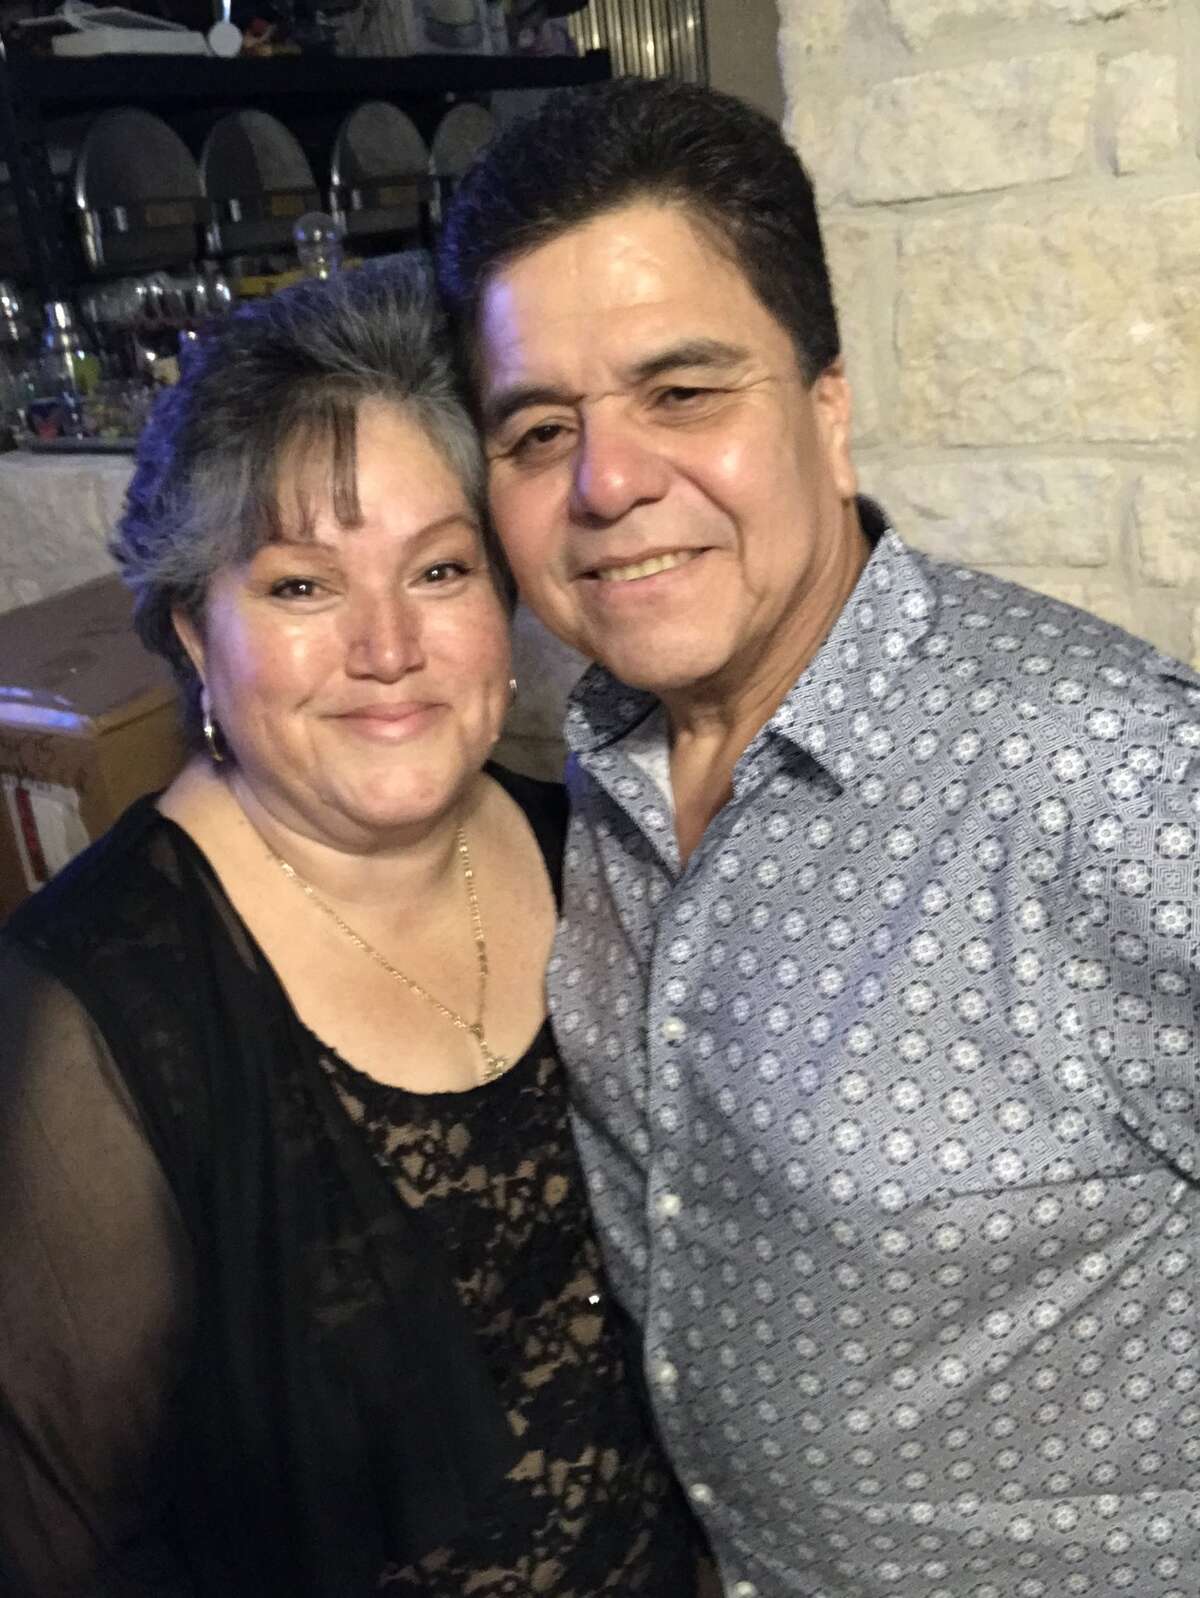 "My parents, Oscar and Yolanda Fuentes, met during Fiesta. My dad was in a band and my mom went to go hire them for my aunt and uncle's wedding. Nine months later they got married and they just celebrated 29 years of marriage on Feb. 1. Every Fiesta, they go to the spot where they met." - Asenette Fuentes